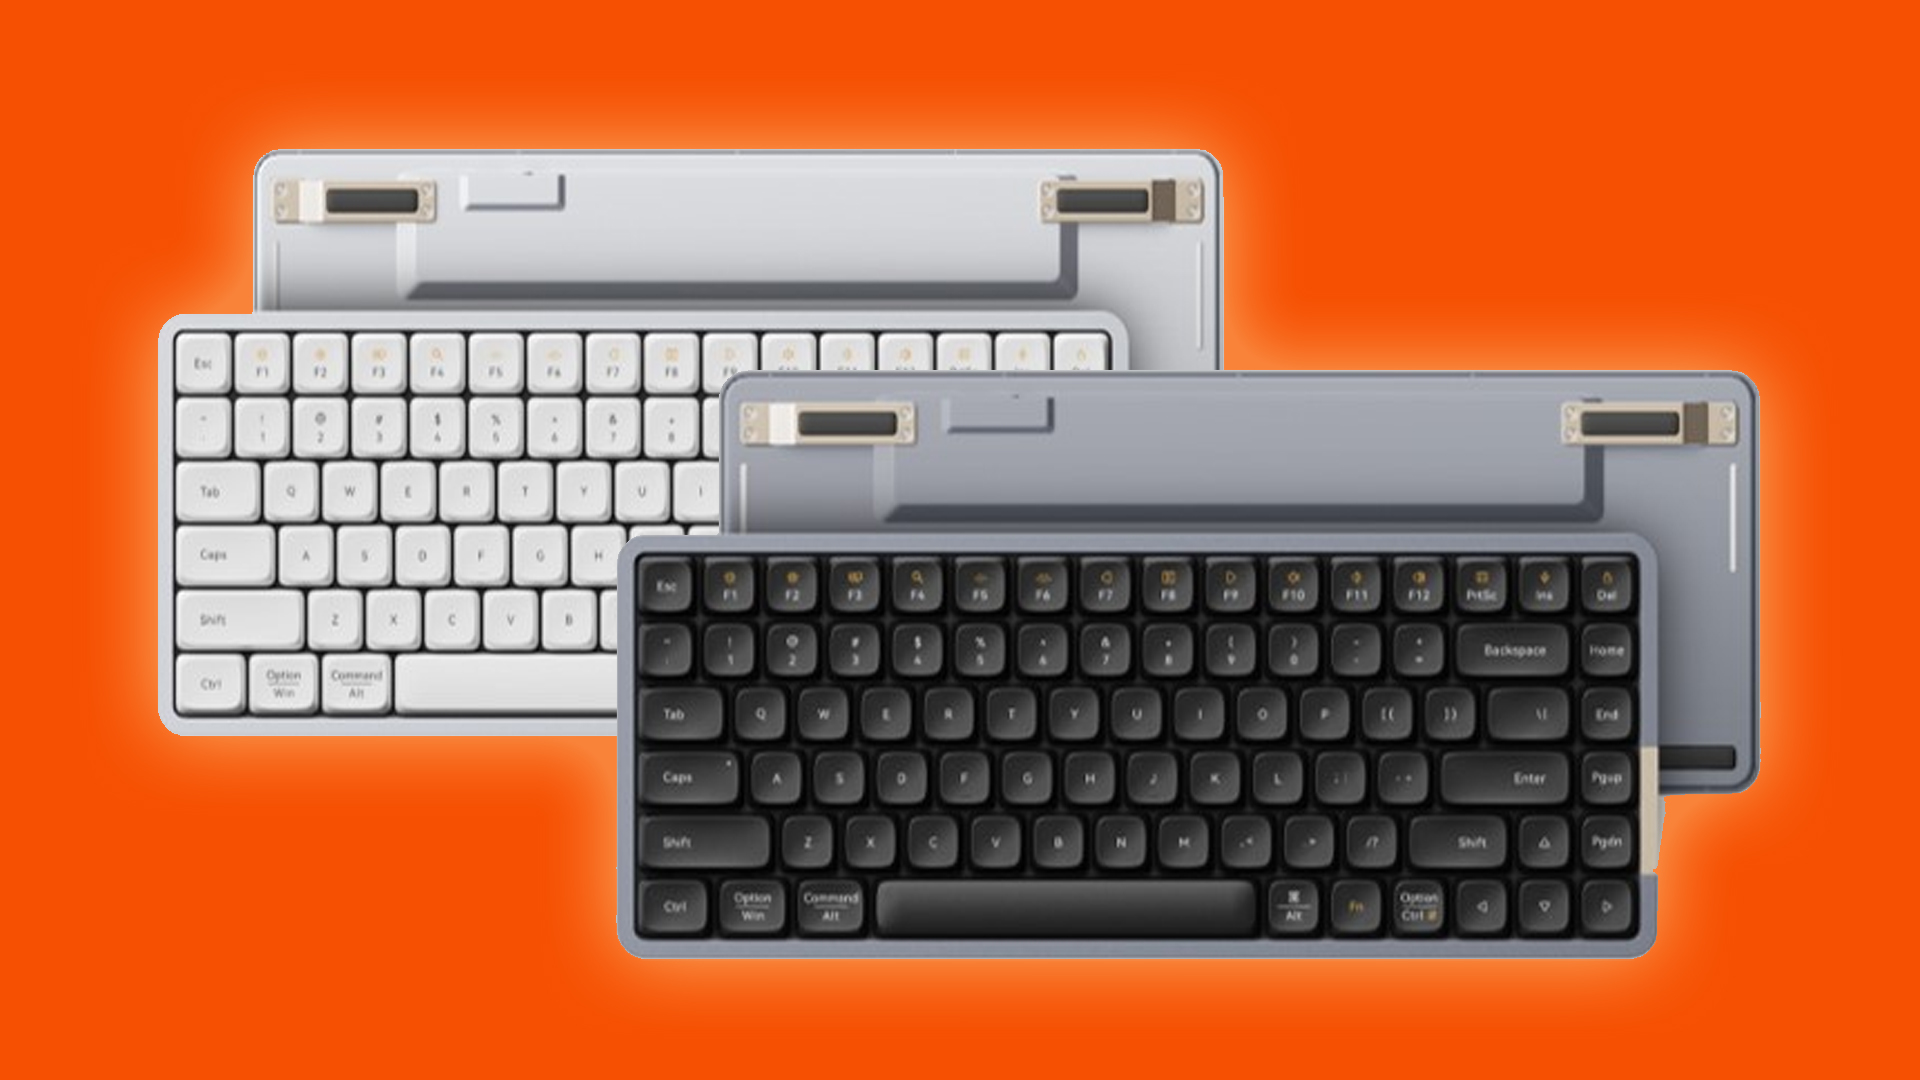 Lofree sets a world's first with its new Lofree Flow keyboard